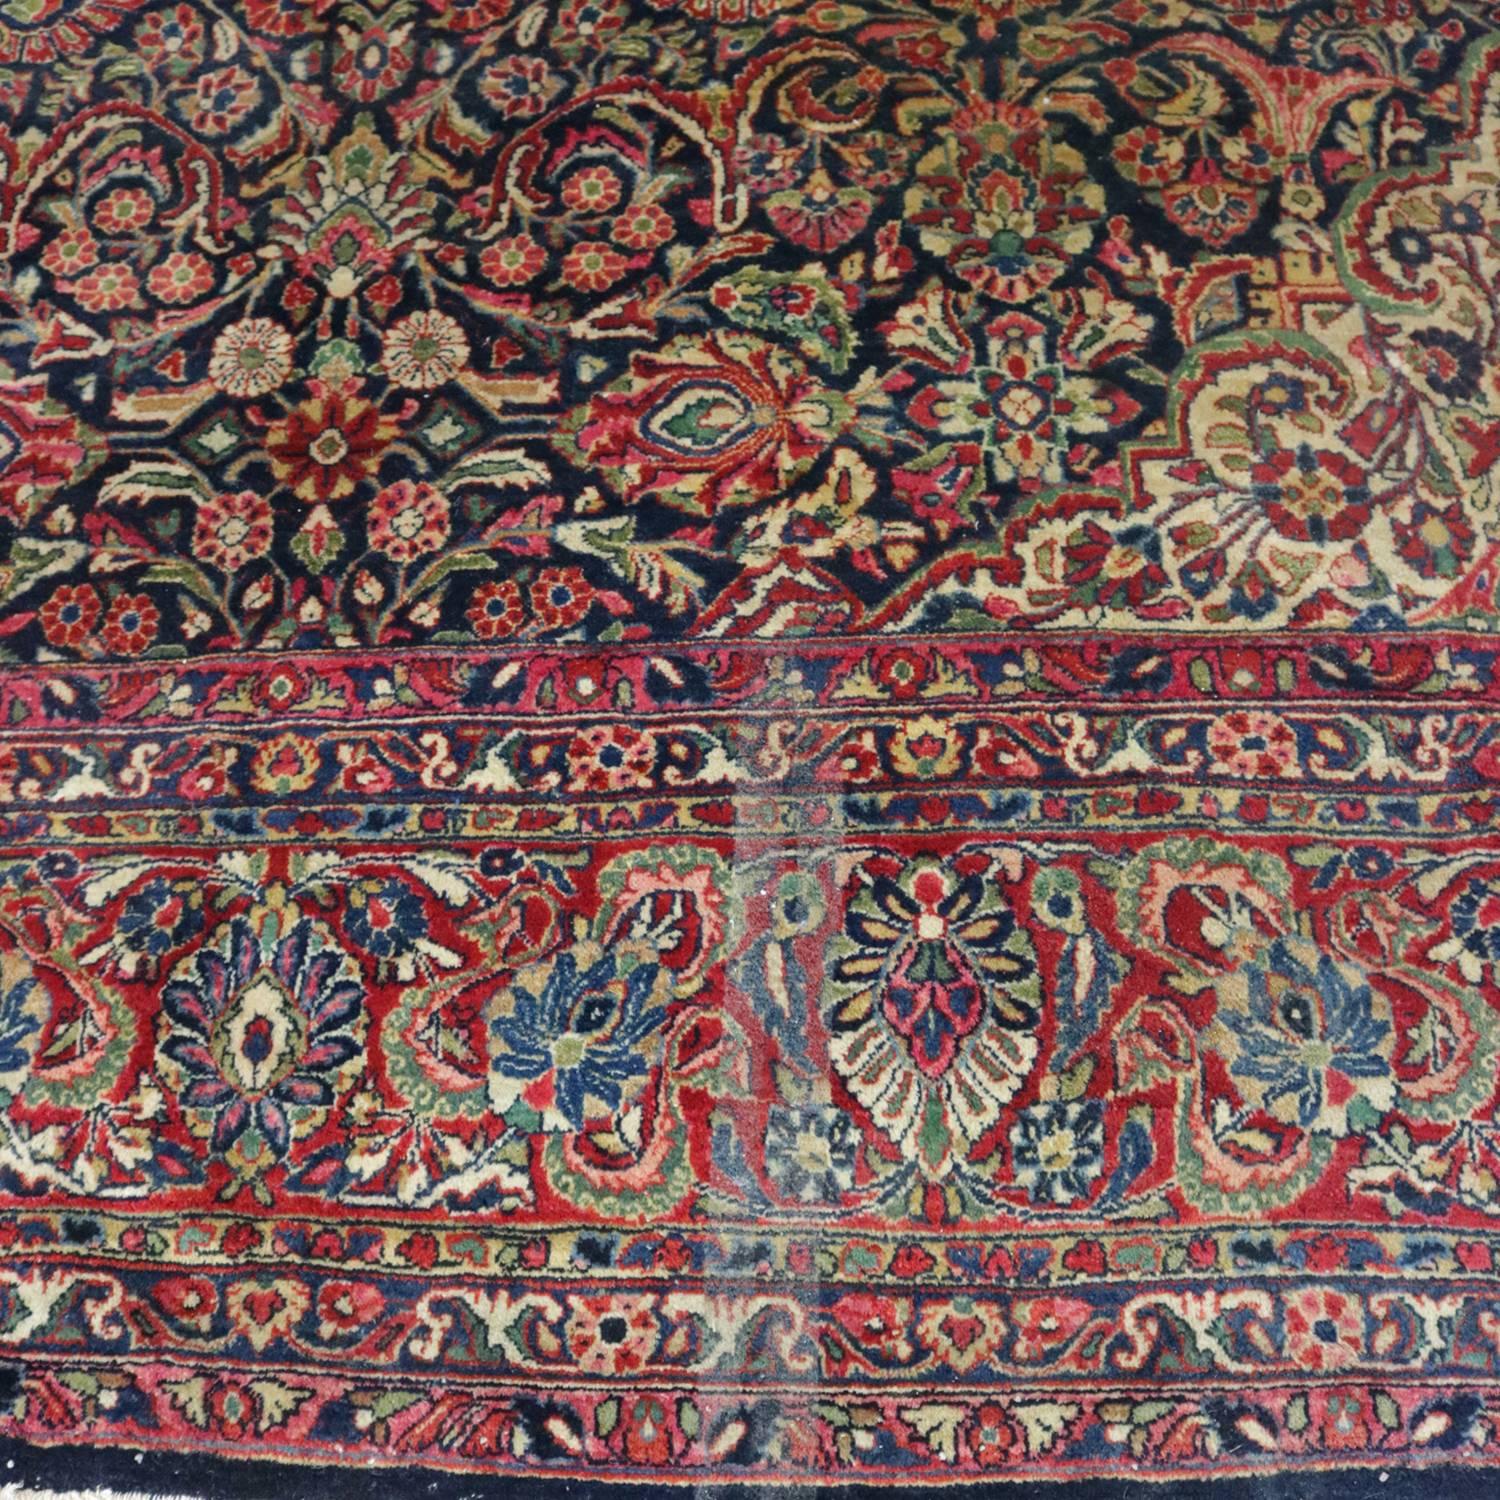 20th Century Antique Palace Size Hand-Knotted Wool Sarouk Persian Carpet, circa 1930